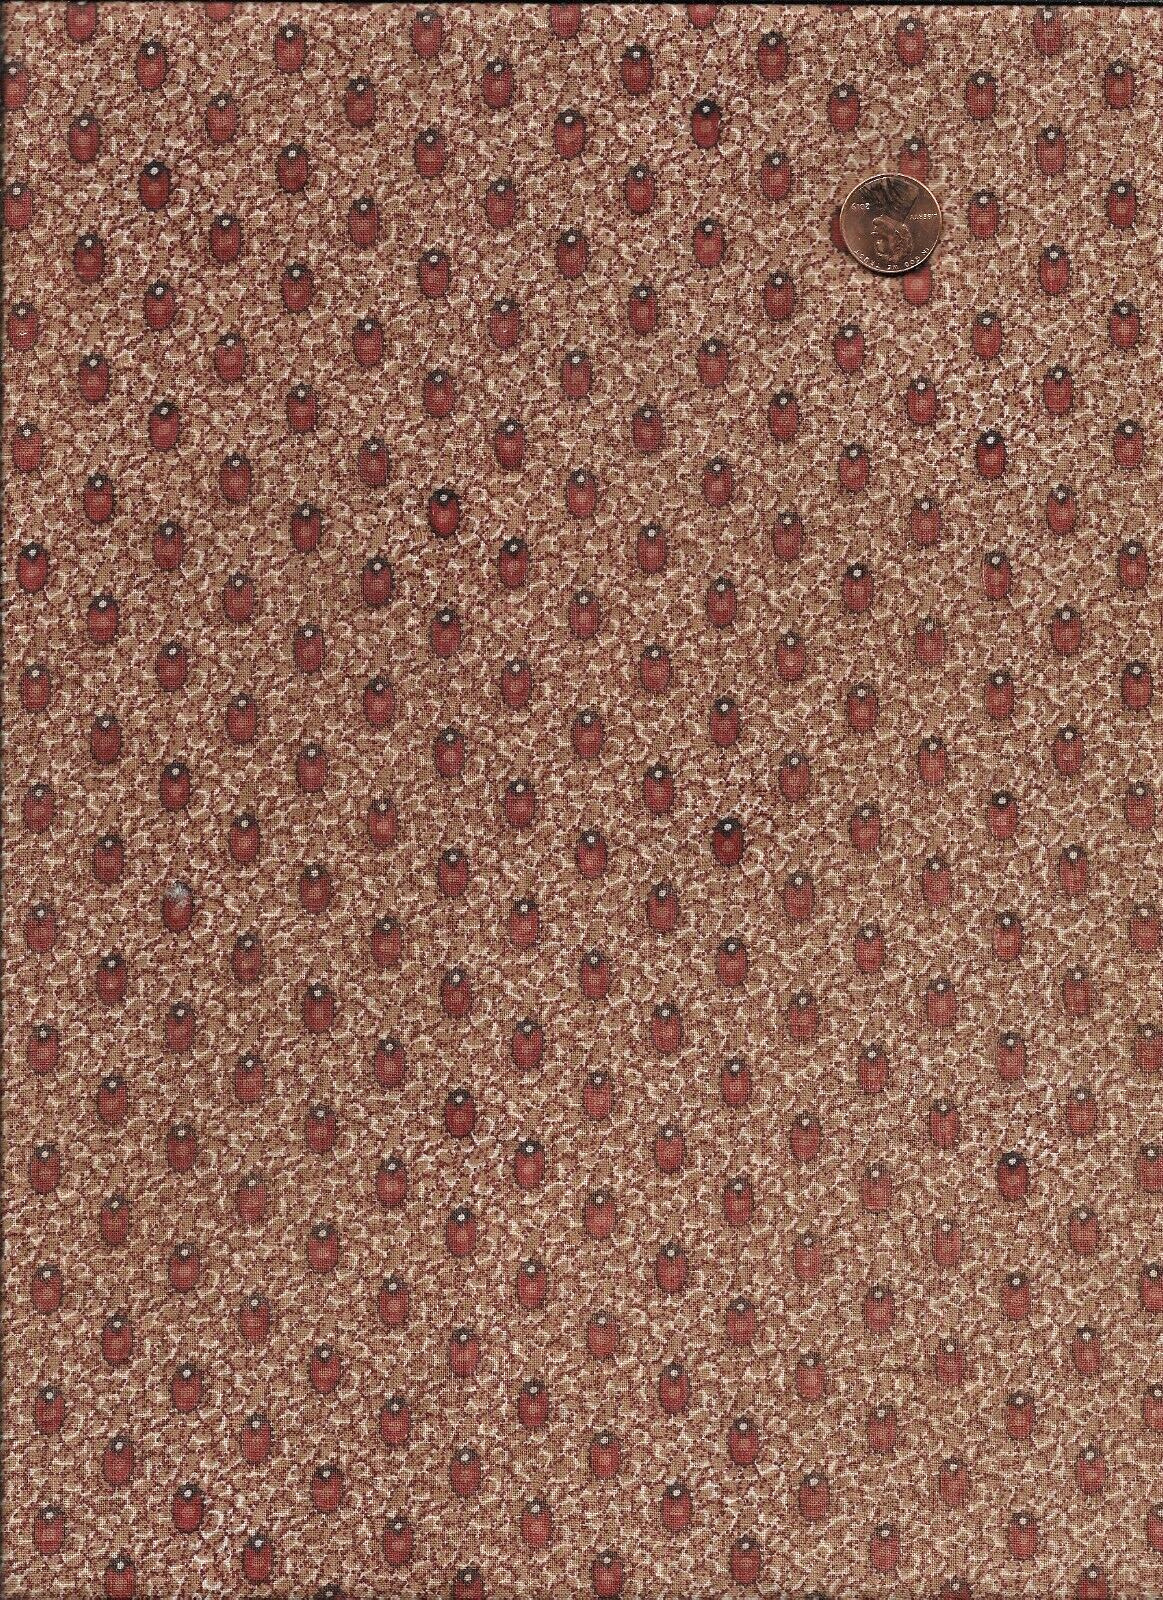 Antique 1870 Madder Dyed Fabric